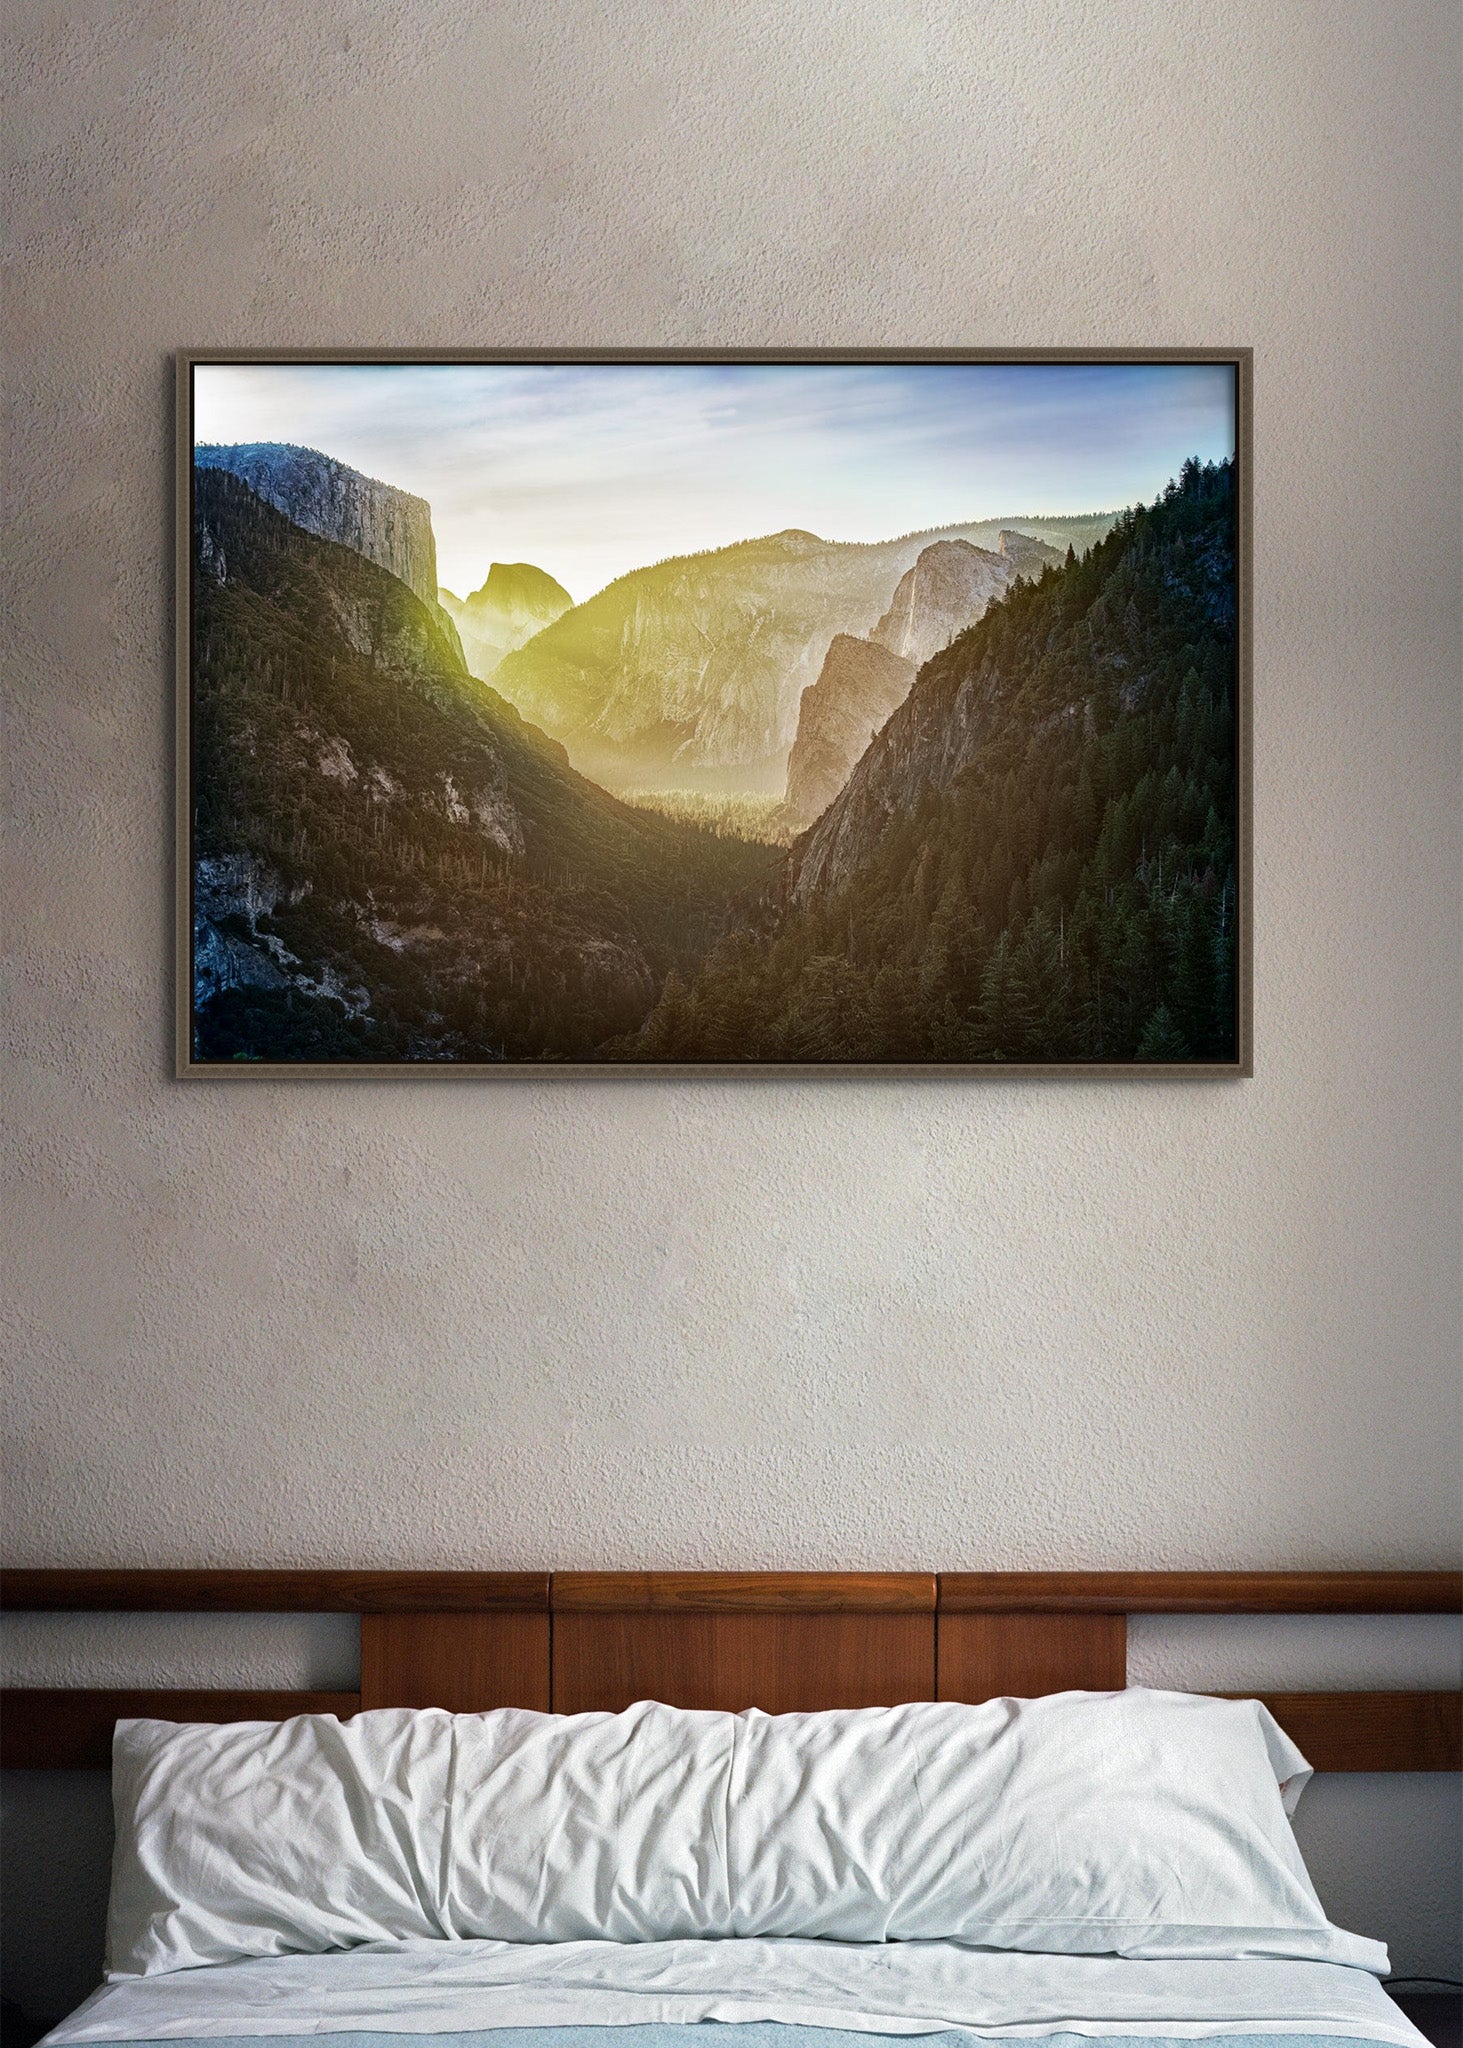 Picture hanging on the wall of a hotel bed. The picture is a fine art landscape photograph titled "The Valley Awakens" by Cameron Dreaux of Dreaux Fine Art.